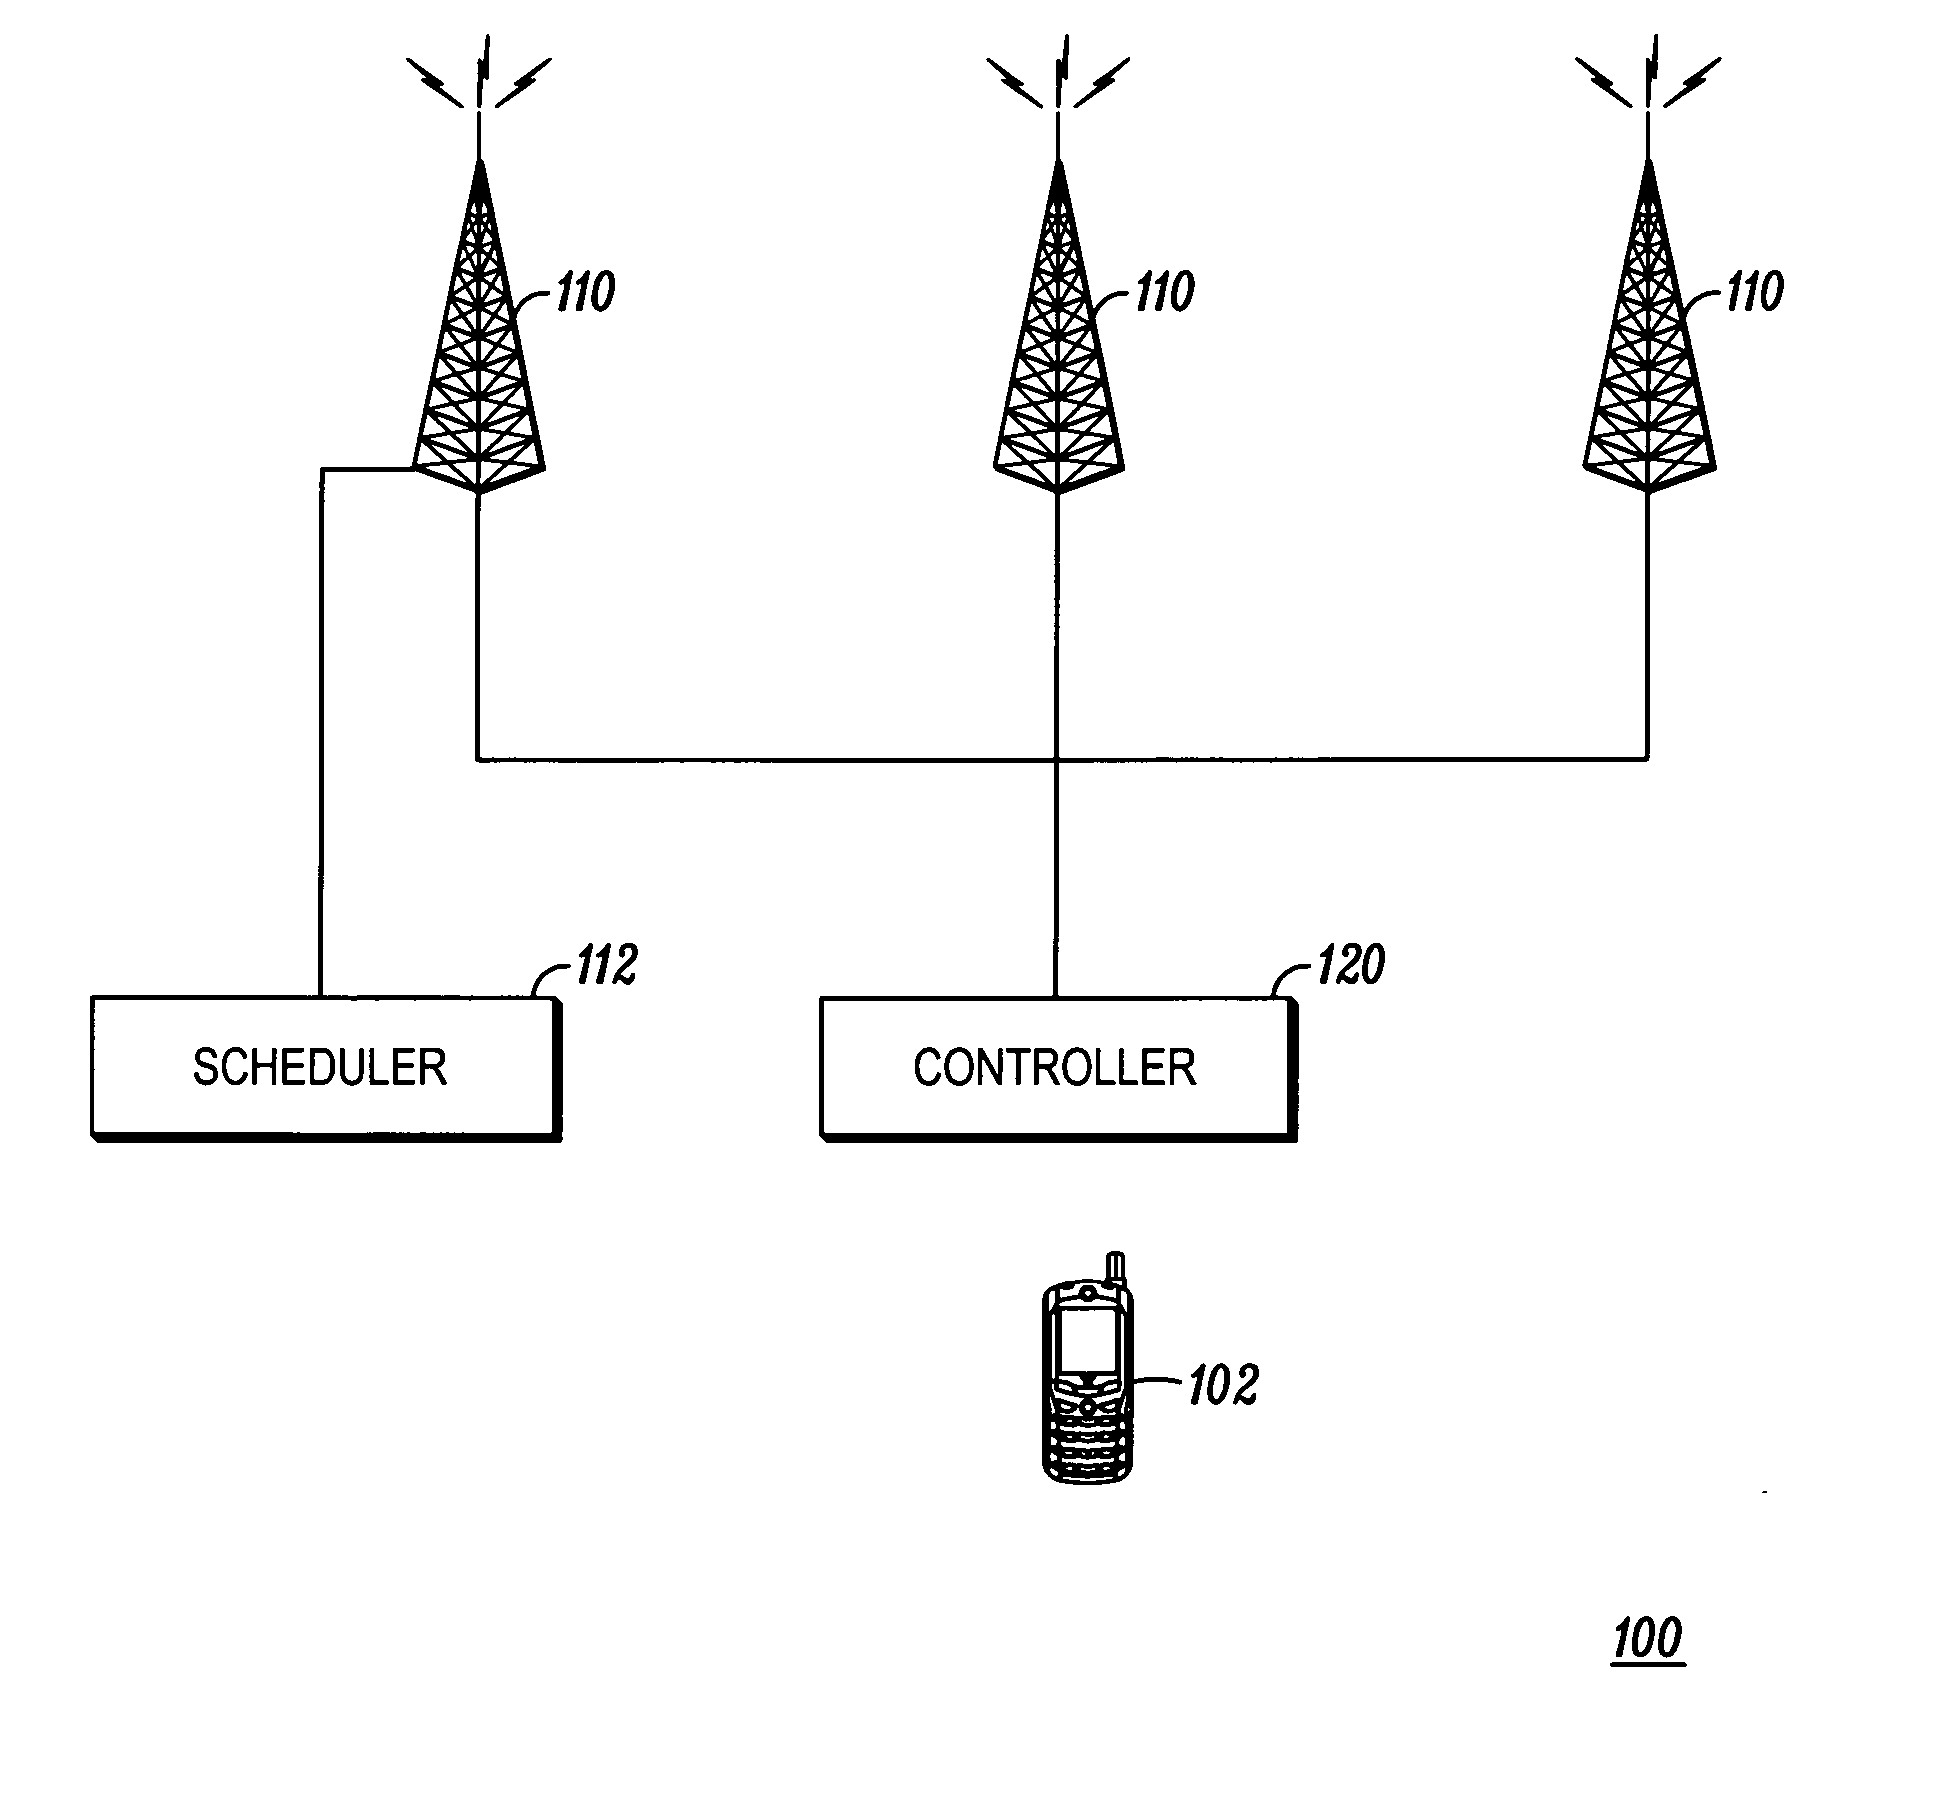 Group scheduling in wireless communication systems